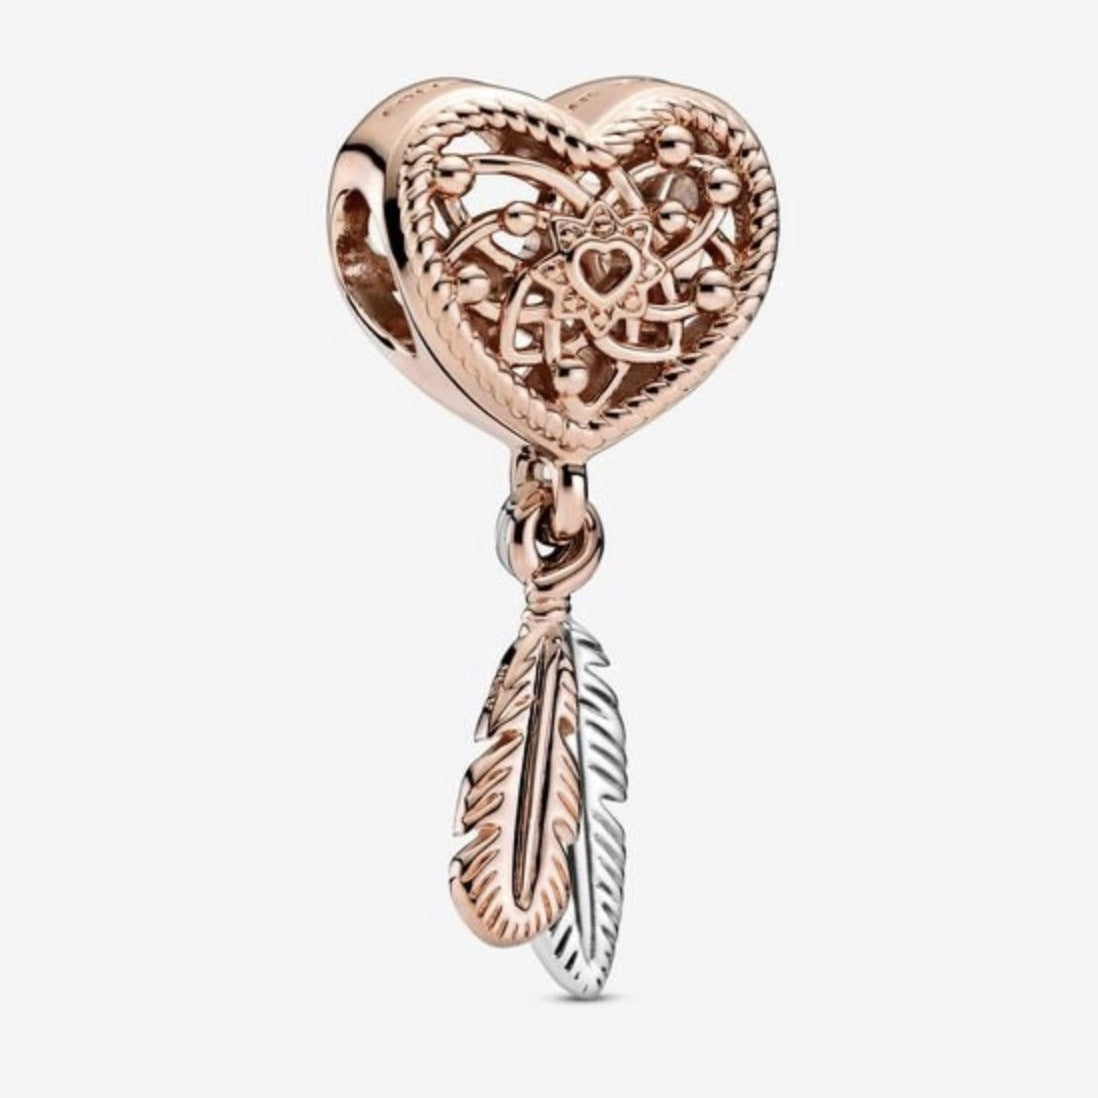 Openwork Heart & Two Feathers Dreamcatcher Charm